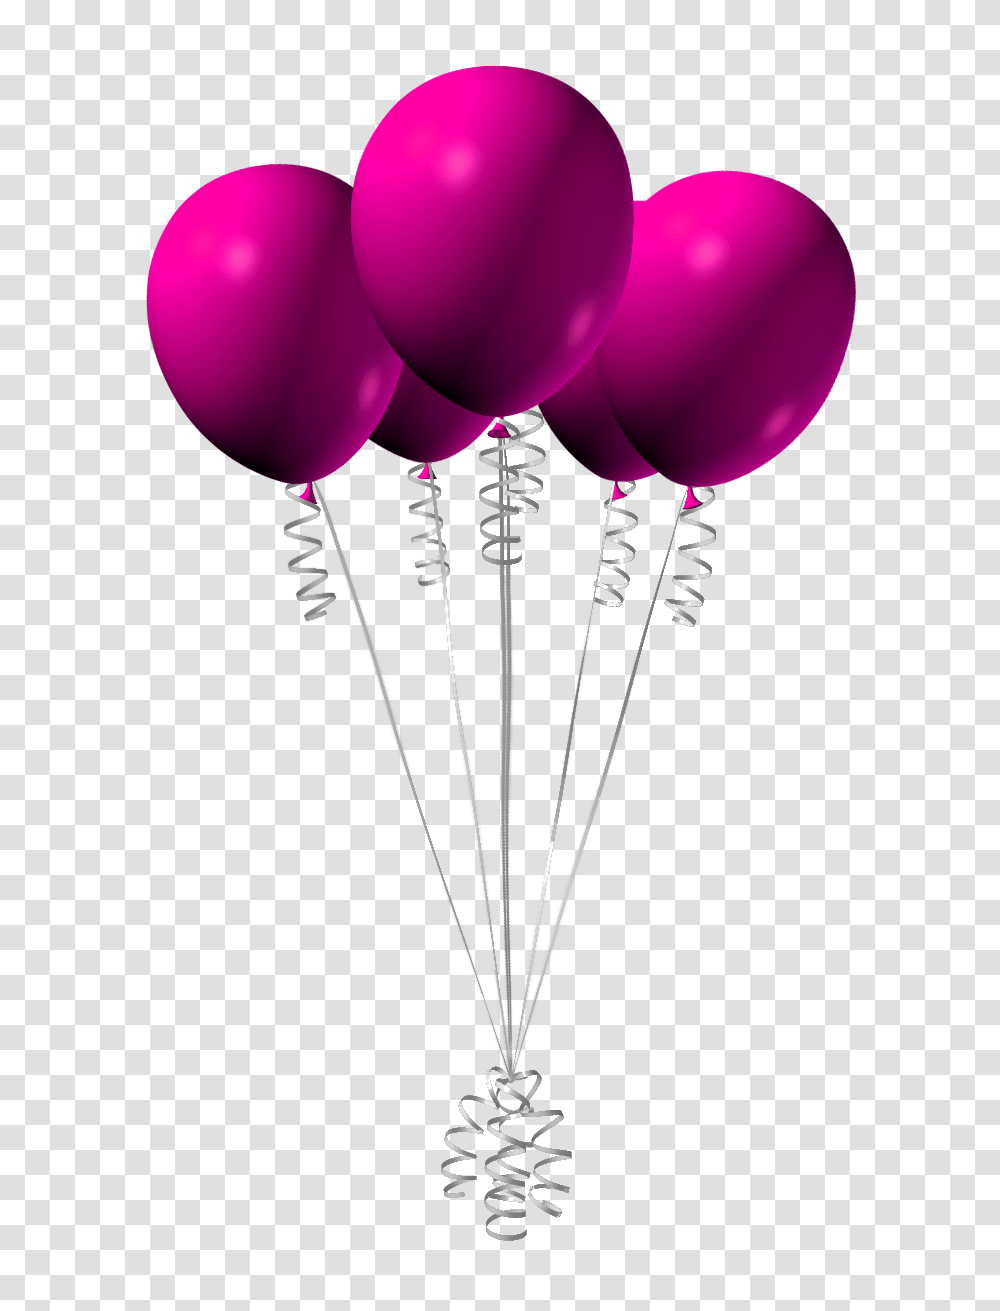 Download Hd Pink Birthday Balloons Image Pink Balloons Background, Lamp Transparent Png